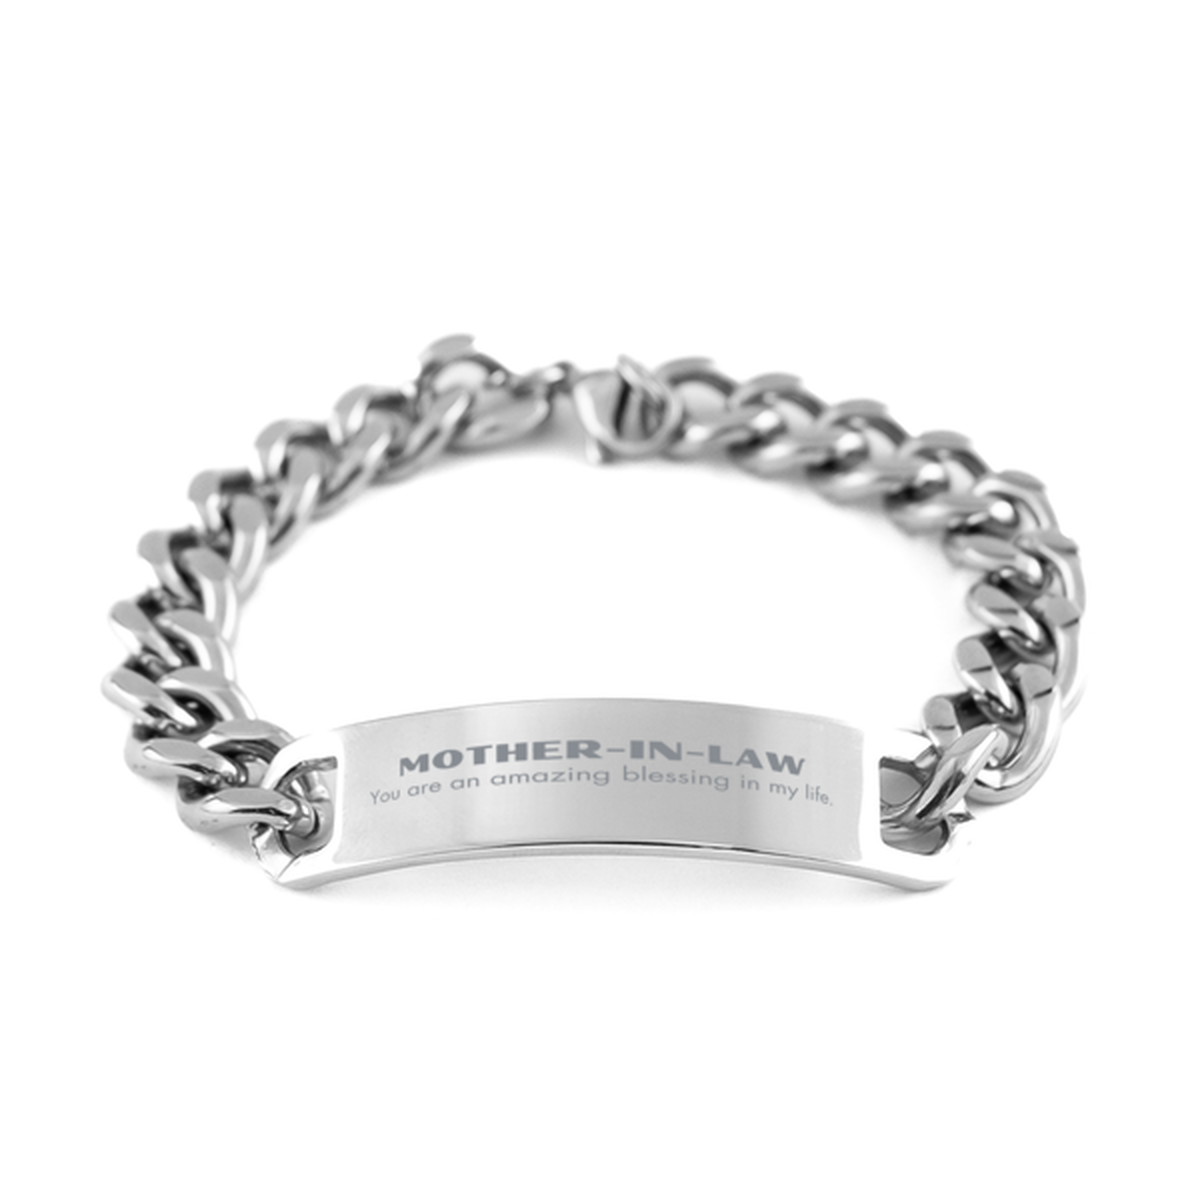 Mother-In-Law Cuban Chain Stainless Steel Bracelet, You are an amazing blessing in my life, Thank You Gifts For Mother-In-Law, Inspirational Birthday Christmas Unique Gifts For Mother-In-Law